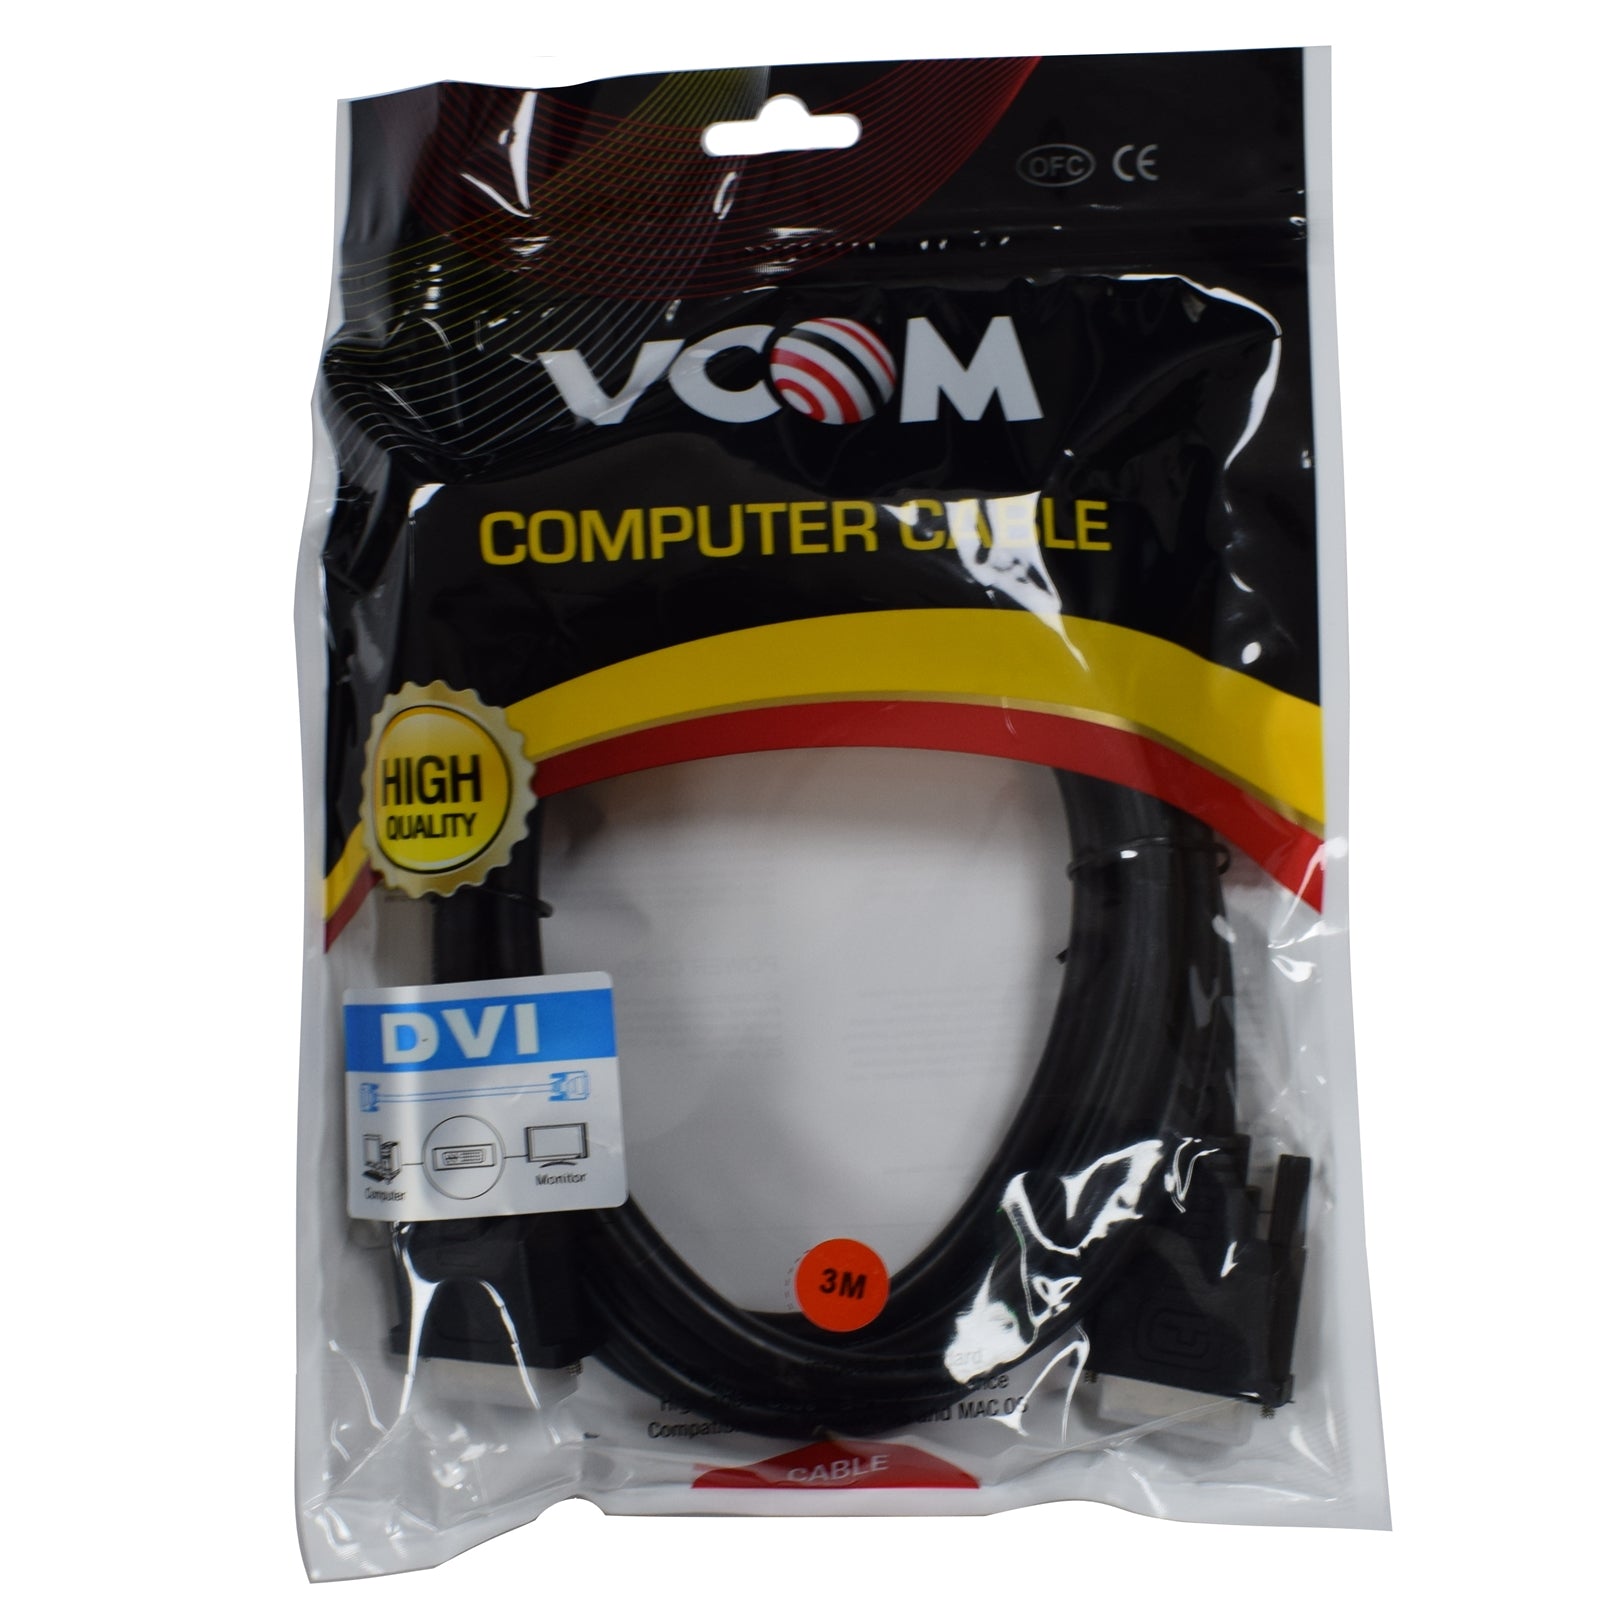 VCOM 3m DVI-D Male-to-Male Black Display Cable